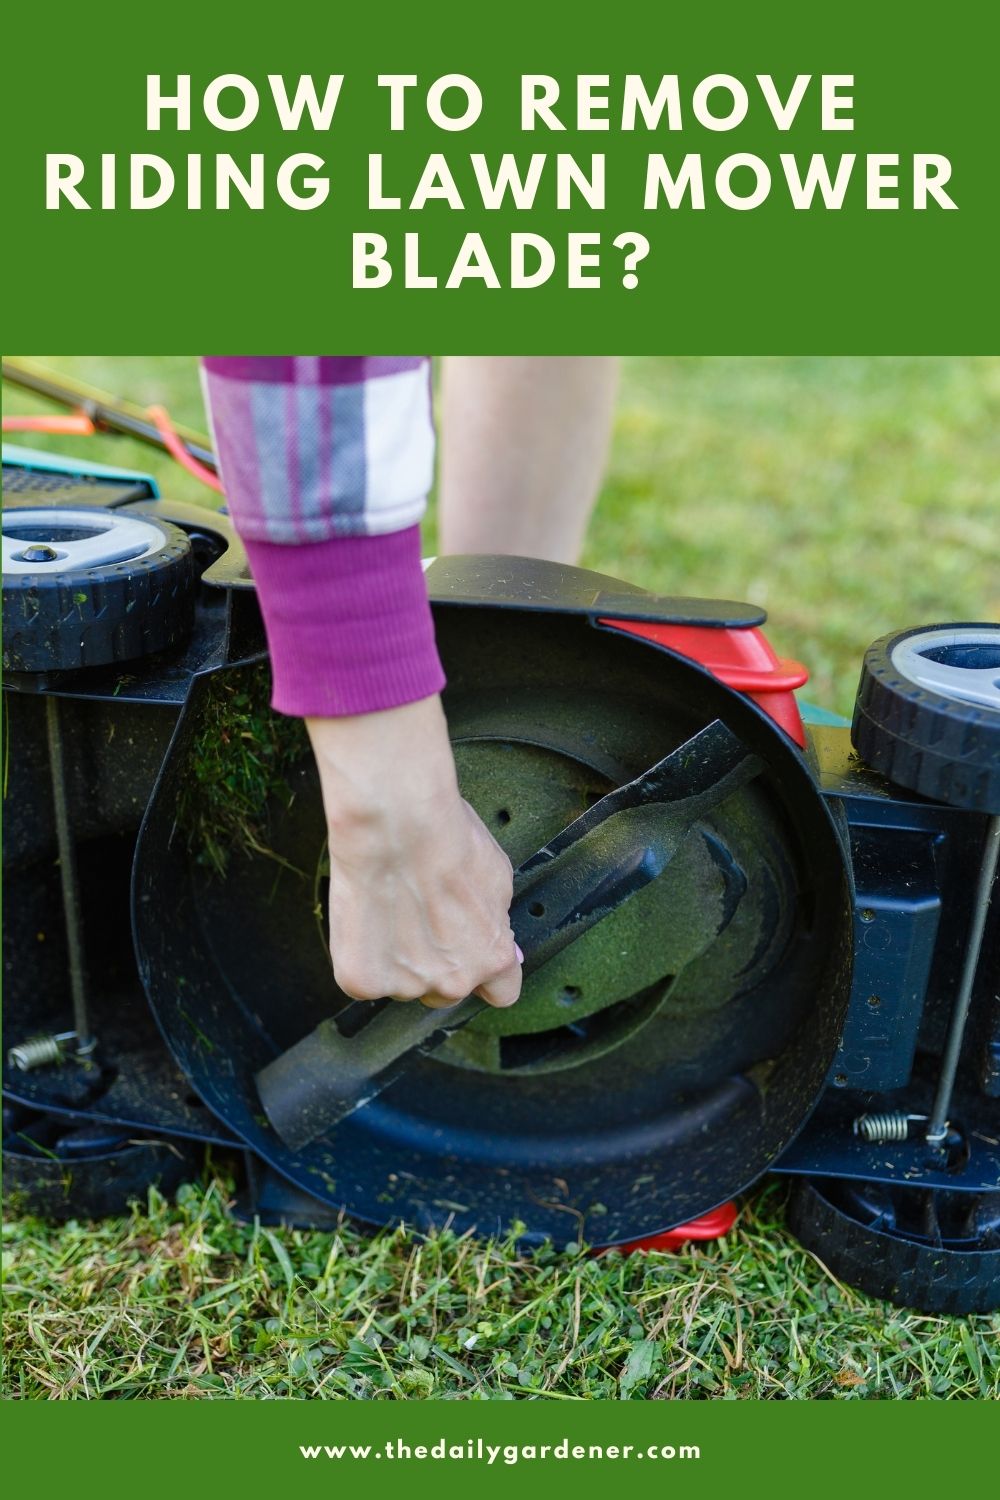 How To Remove Riding Lawn Mower Blade